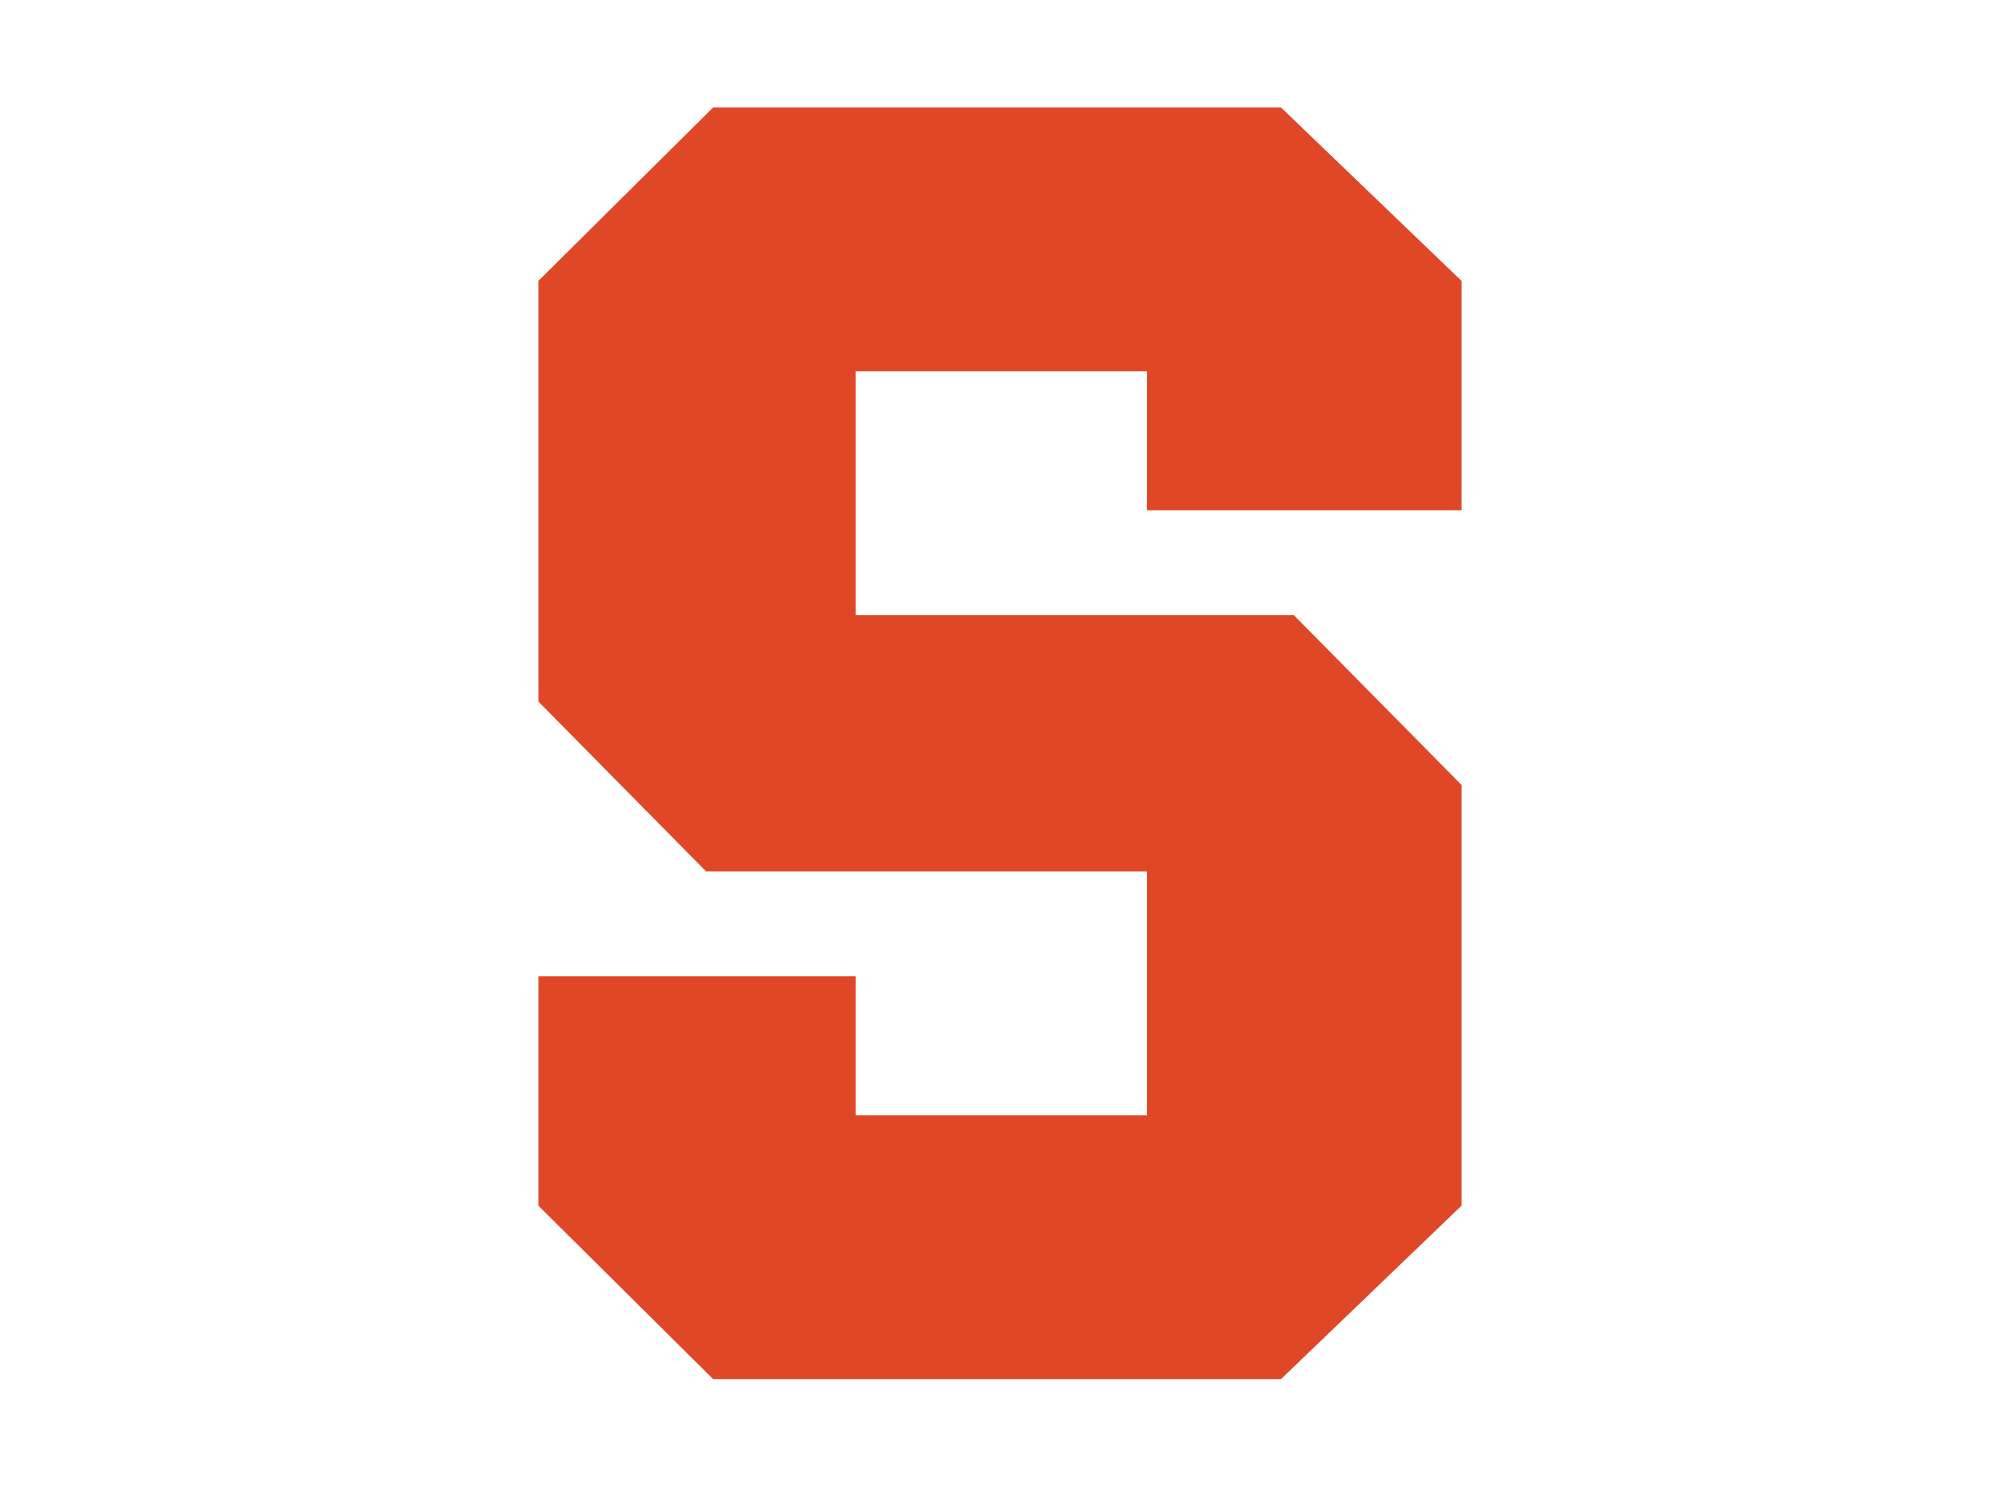 Syracuse's Logo - UPDATE: Syracuse fraternity permanently expelled over racist video